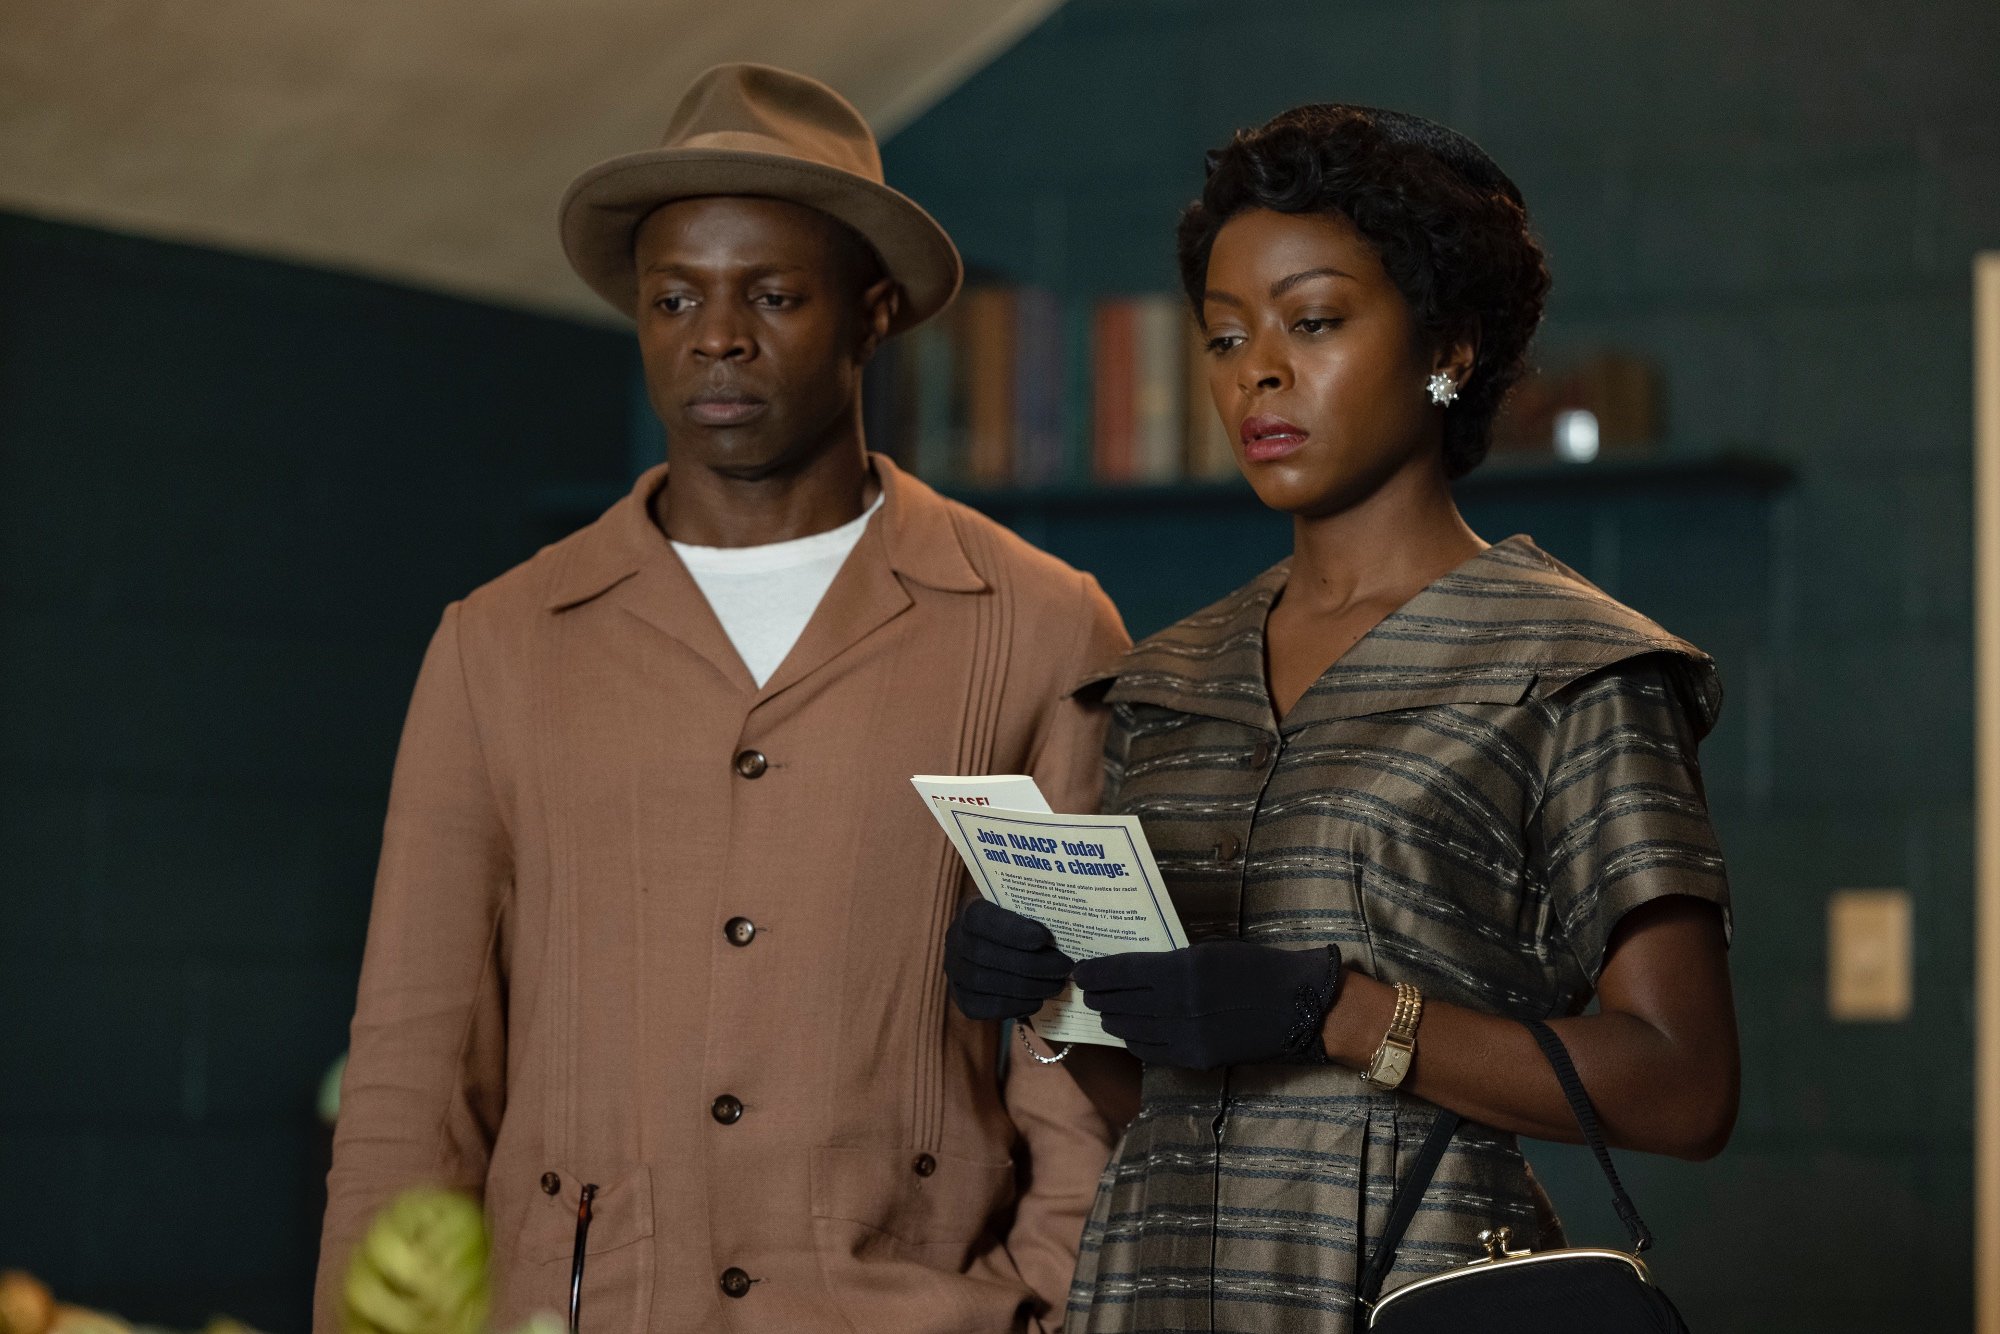 'Till' Sean Patrick Thomas as Gene Mobley and Danielle Deadwyler as Mamie Till-Mobley with a serious look on their faces. Deadwyler is holding NAACP pamphlets.